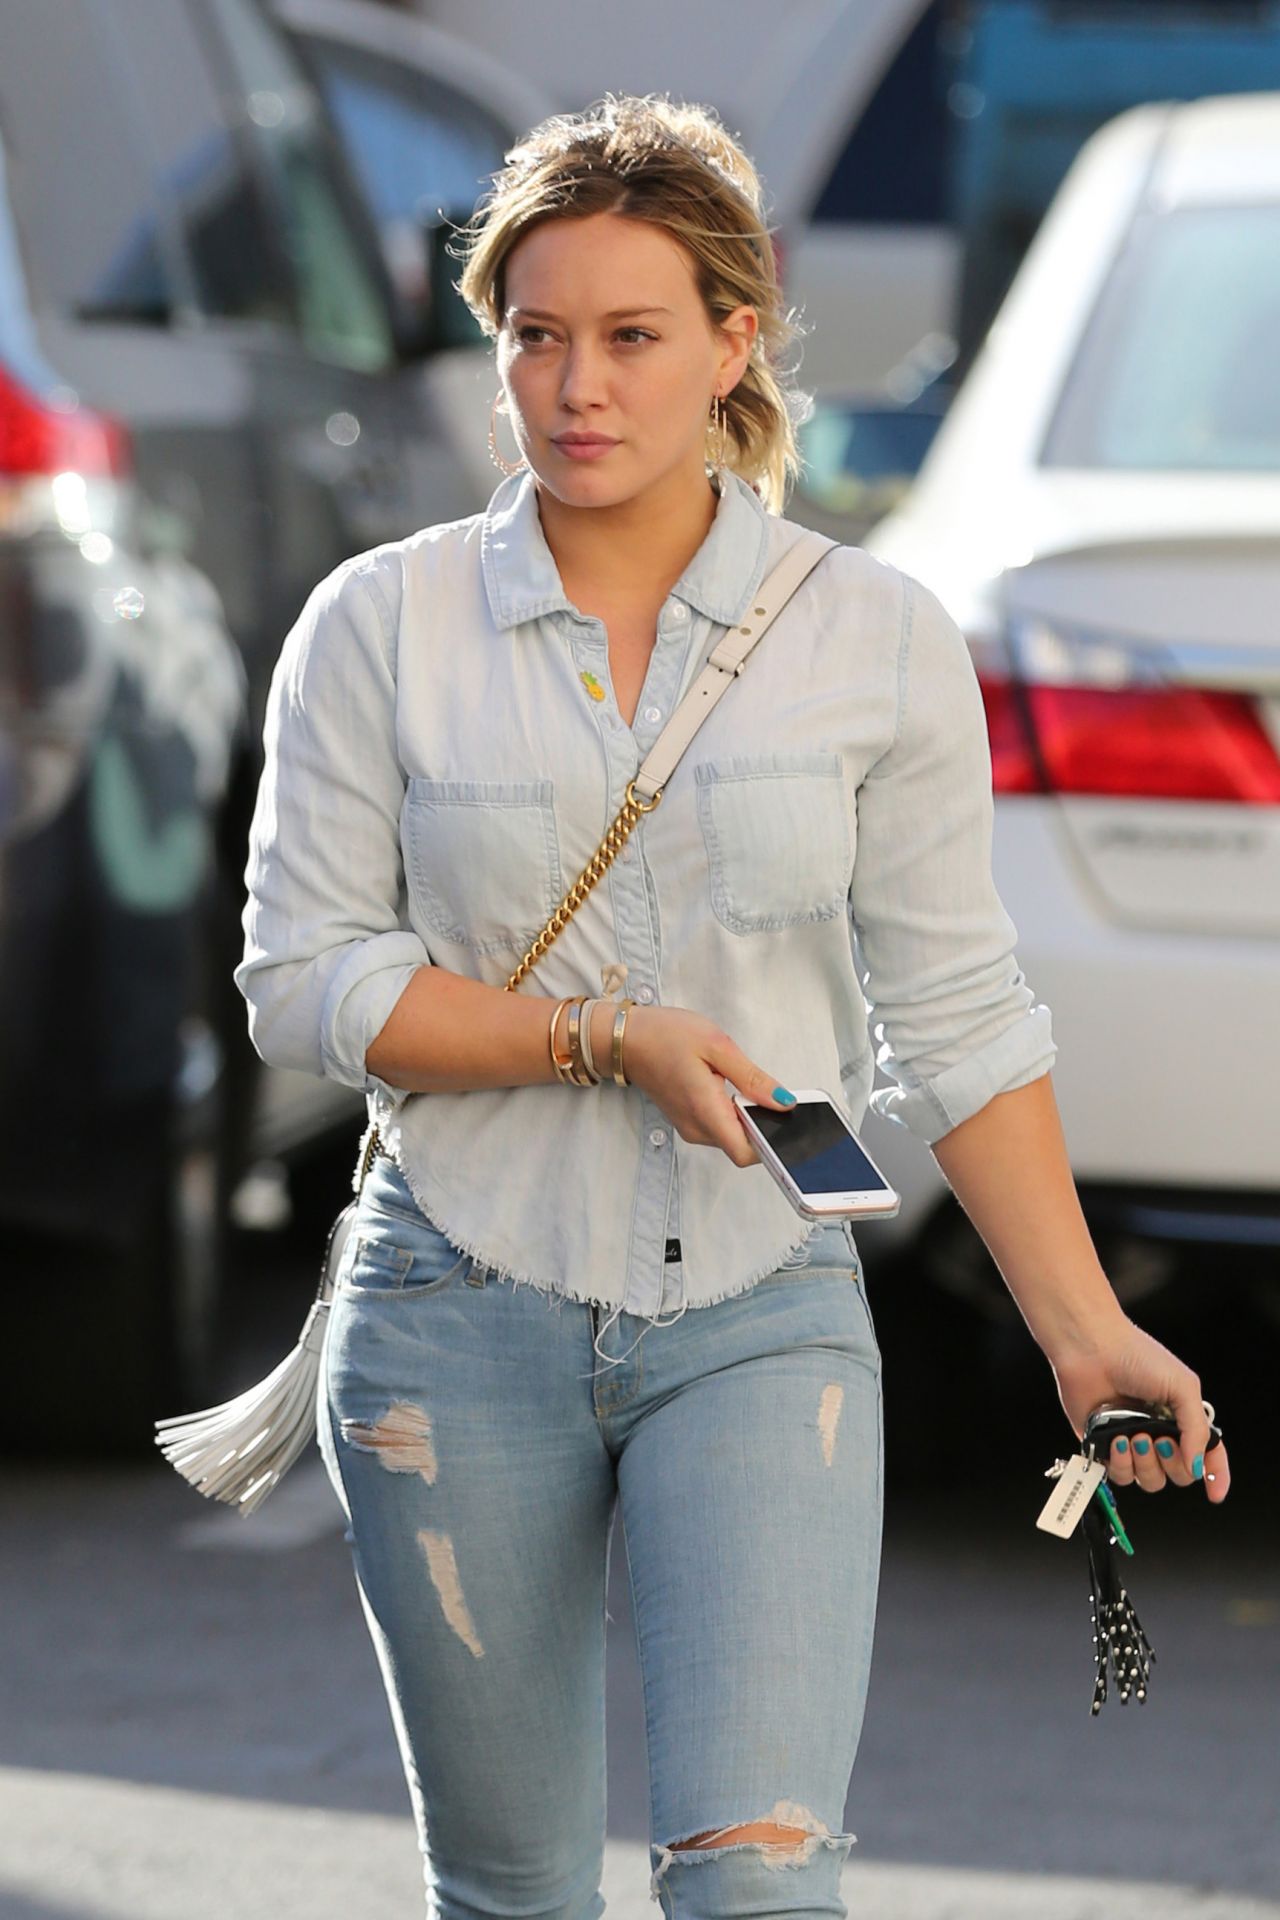 Hilary Duff Urban Outfit Visits The Nail Salon In